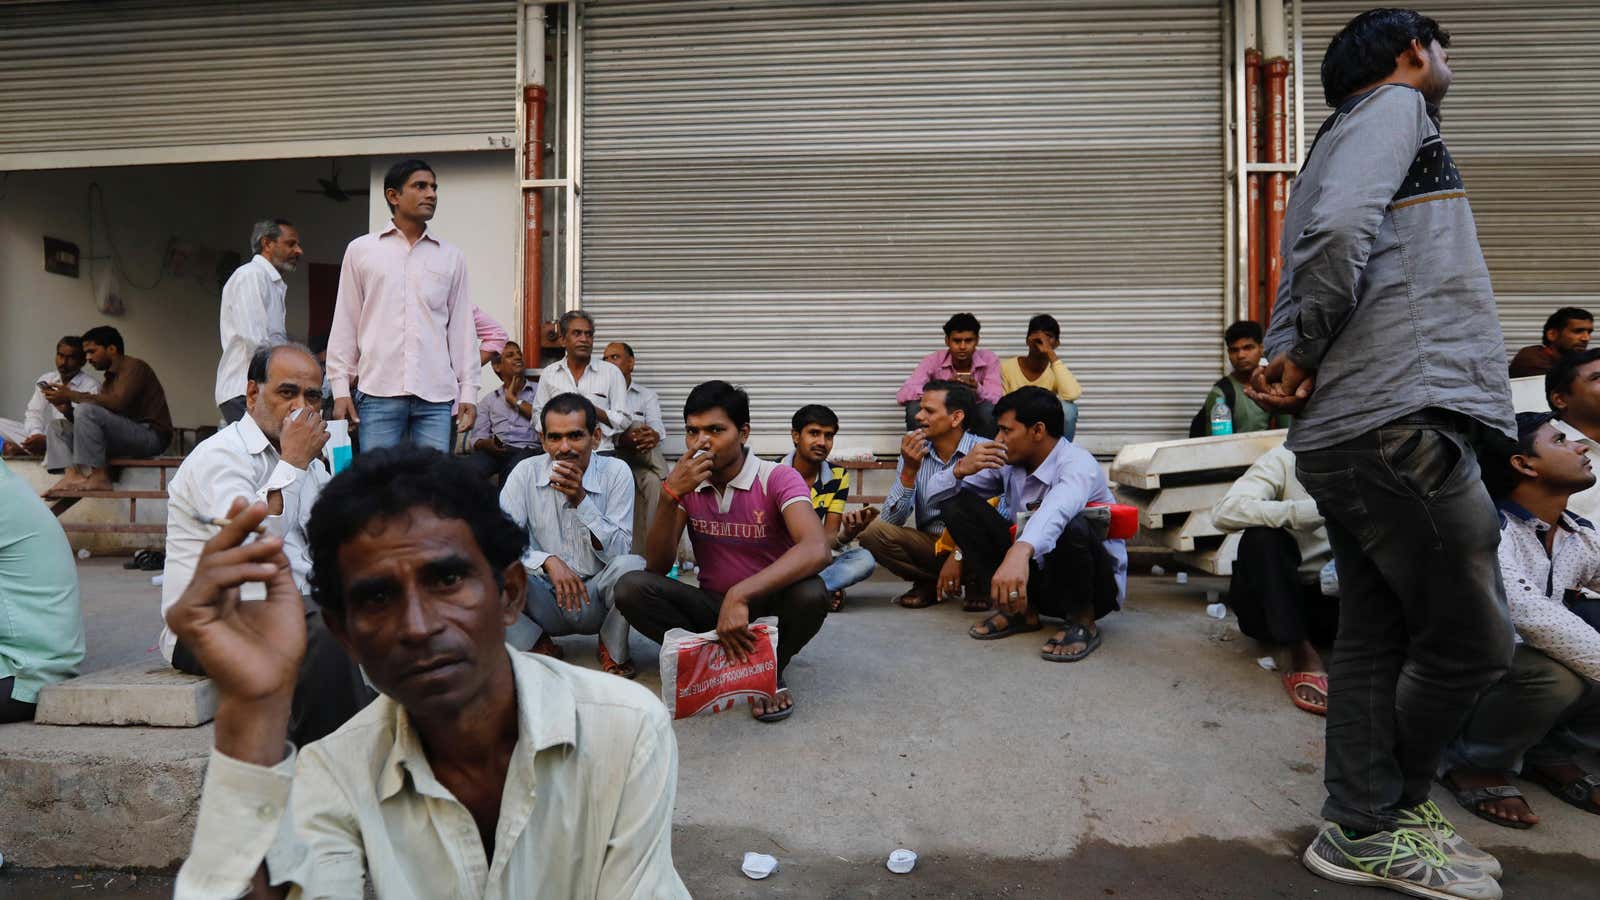 A quarter of Indian youth are unemployed, worse than Indonesia and Bangladesh